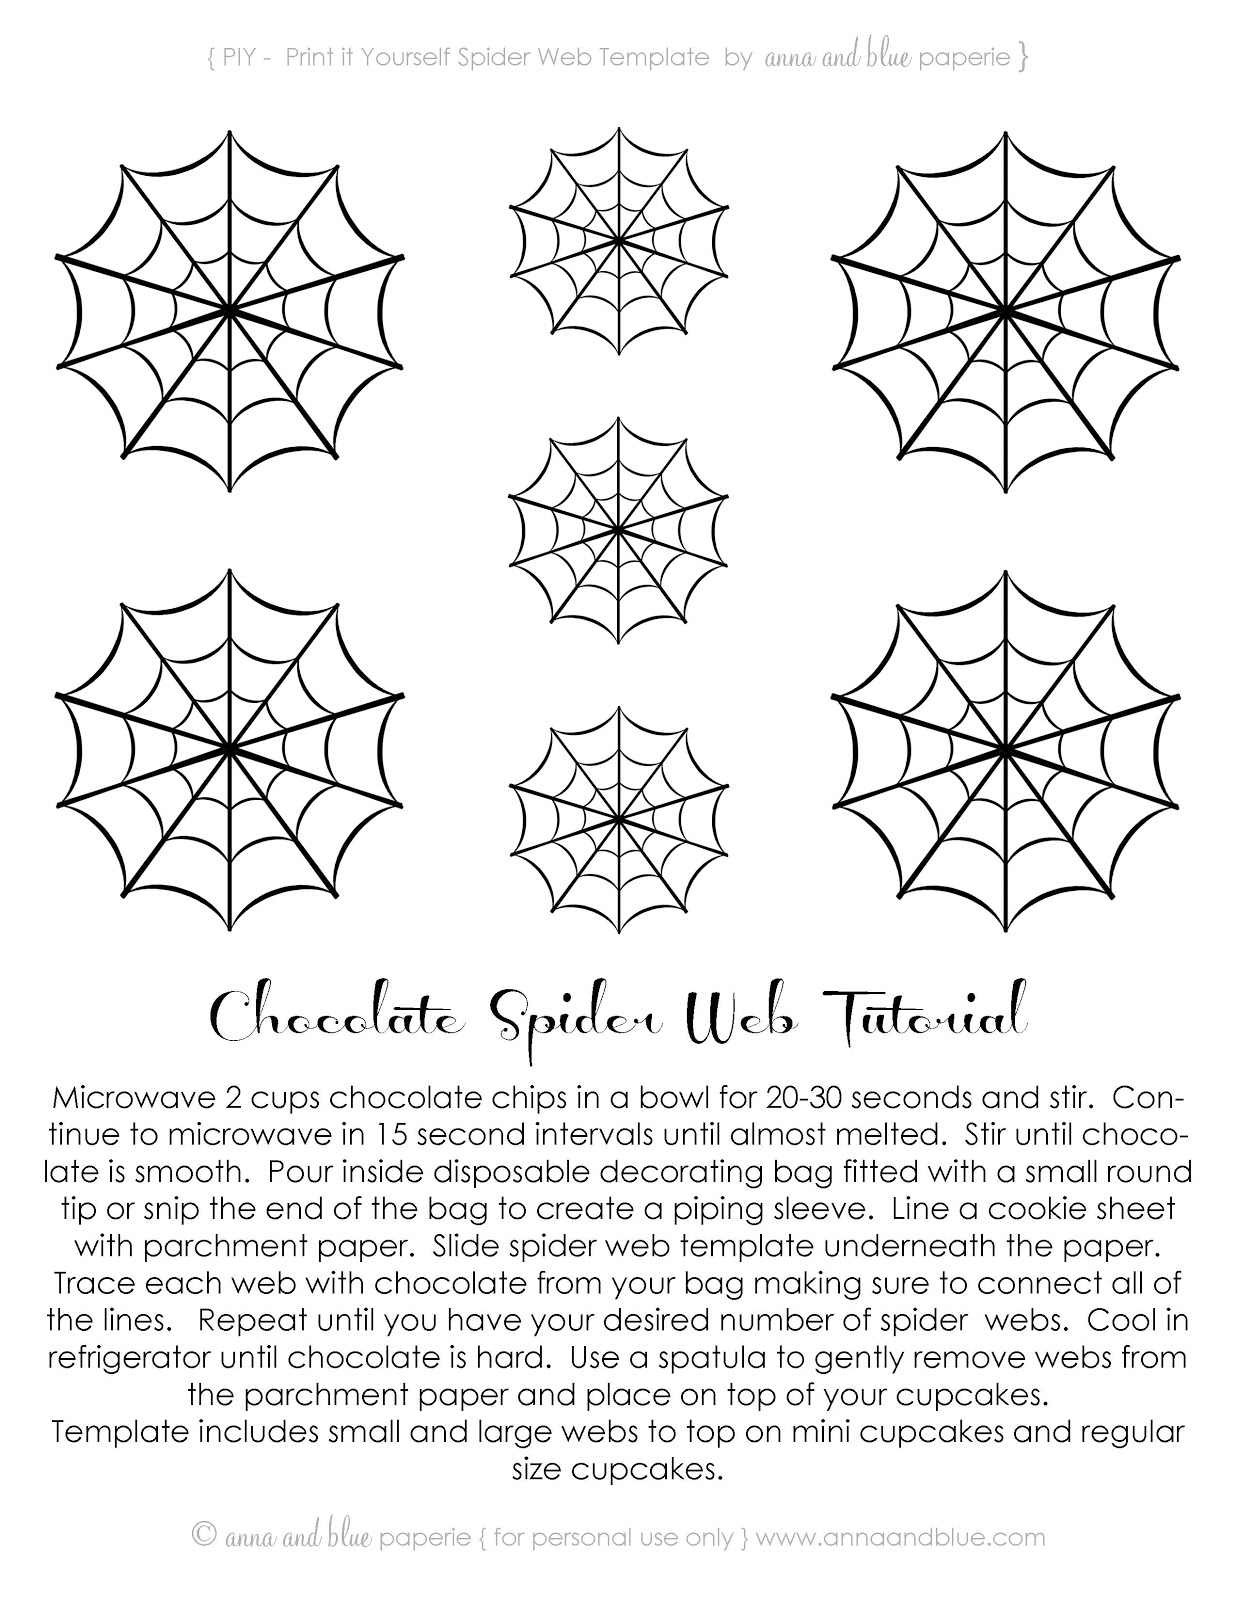 Anna And Blue Paperie Free Printable Spooktacular Spider Webs